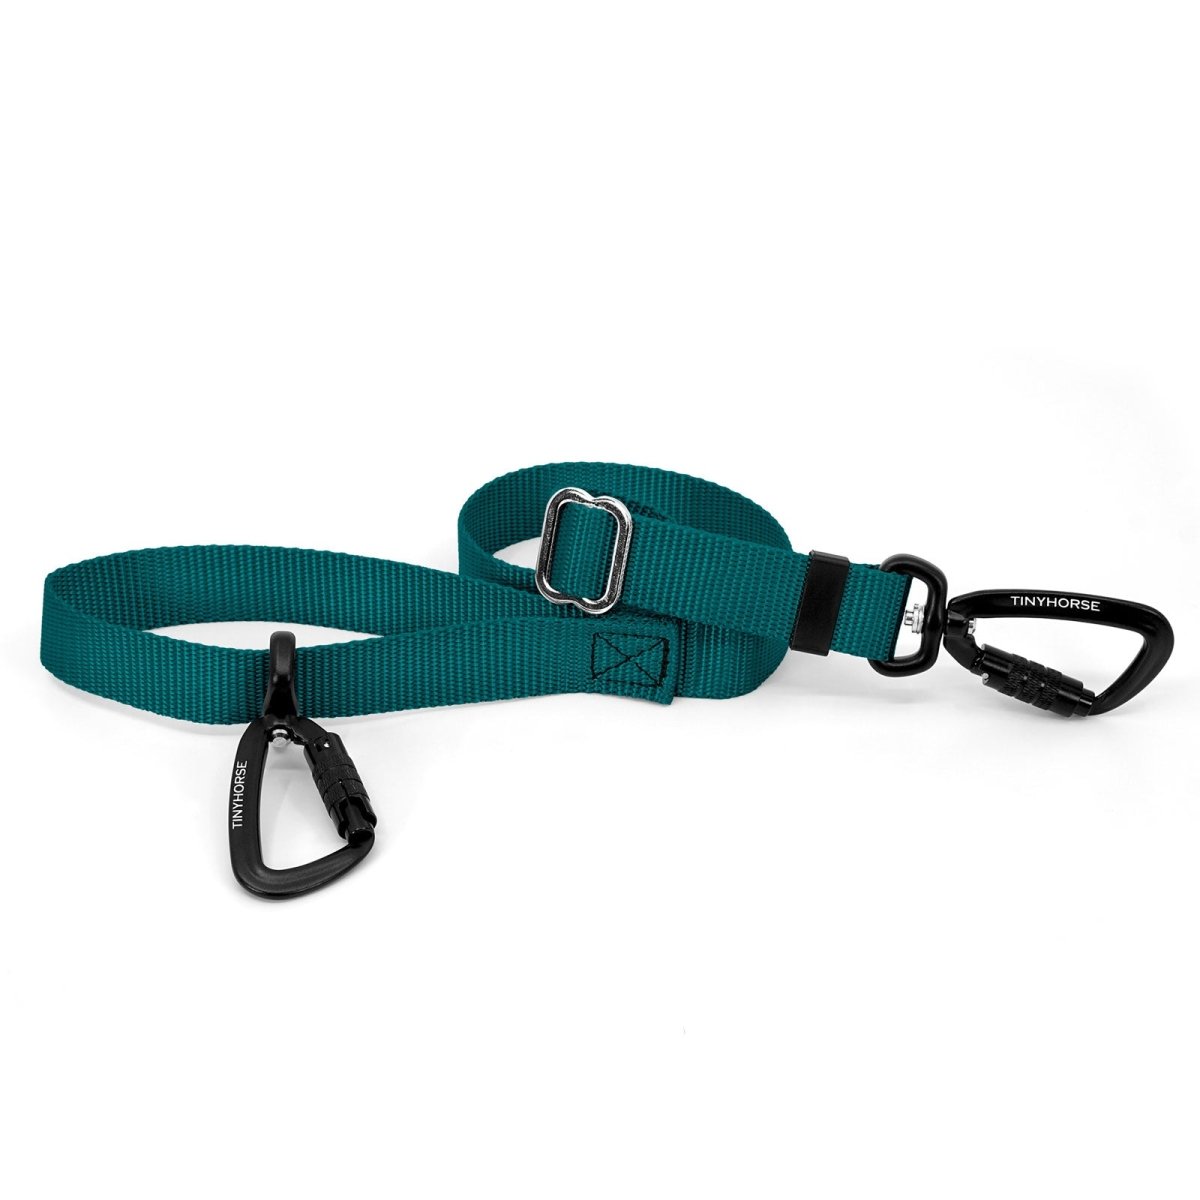 A teal-coloured Lead-All Lite with an adjustable nylon webbing leash and 2 auto-locking carabiners